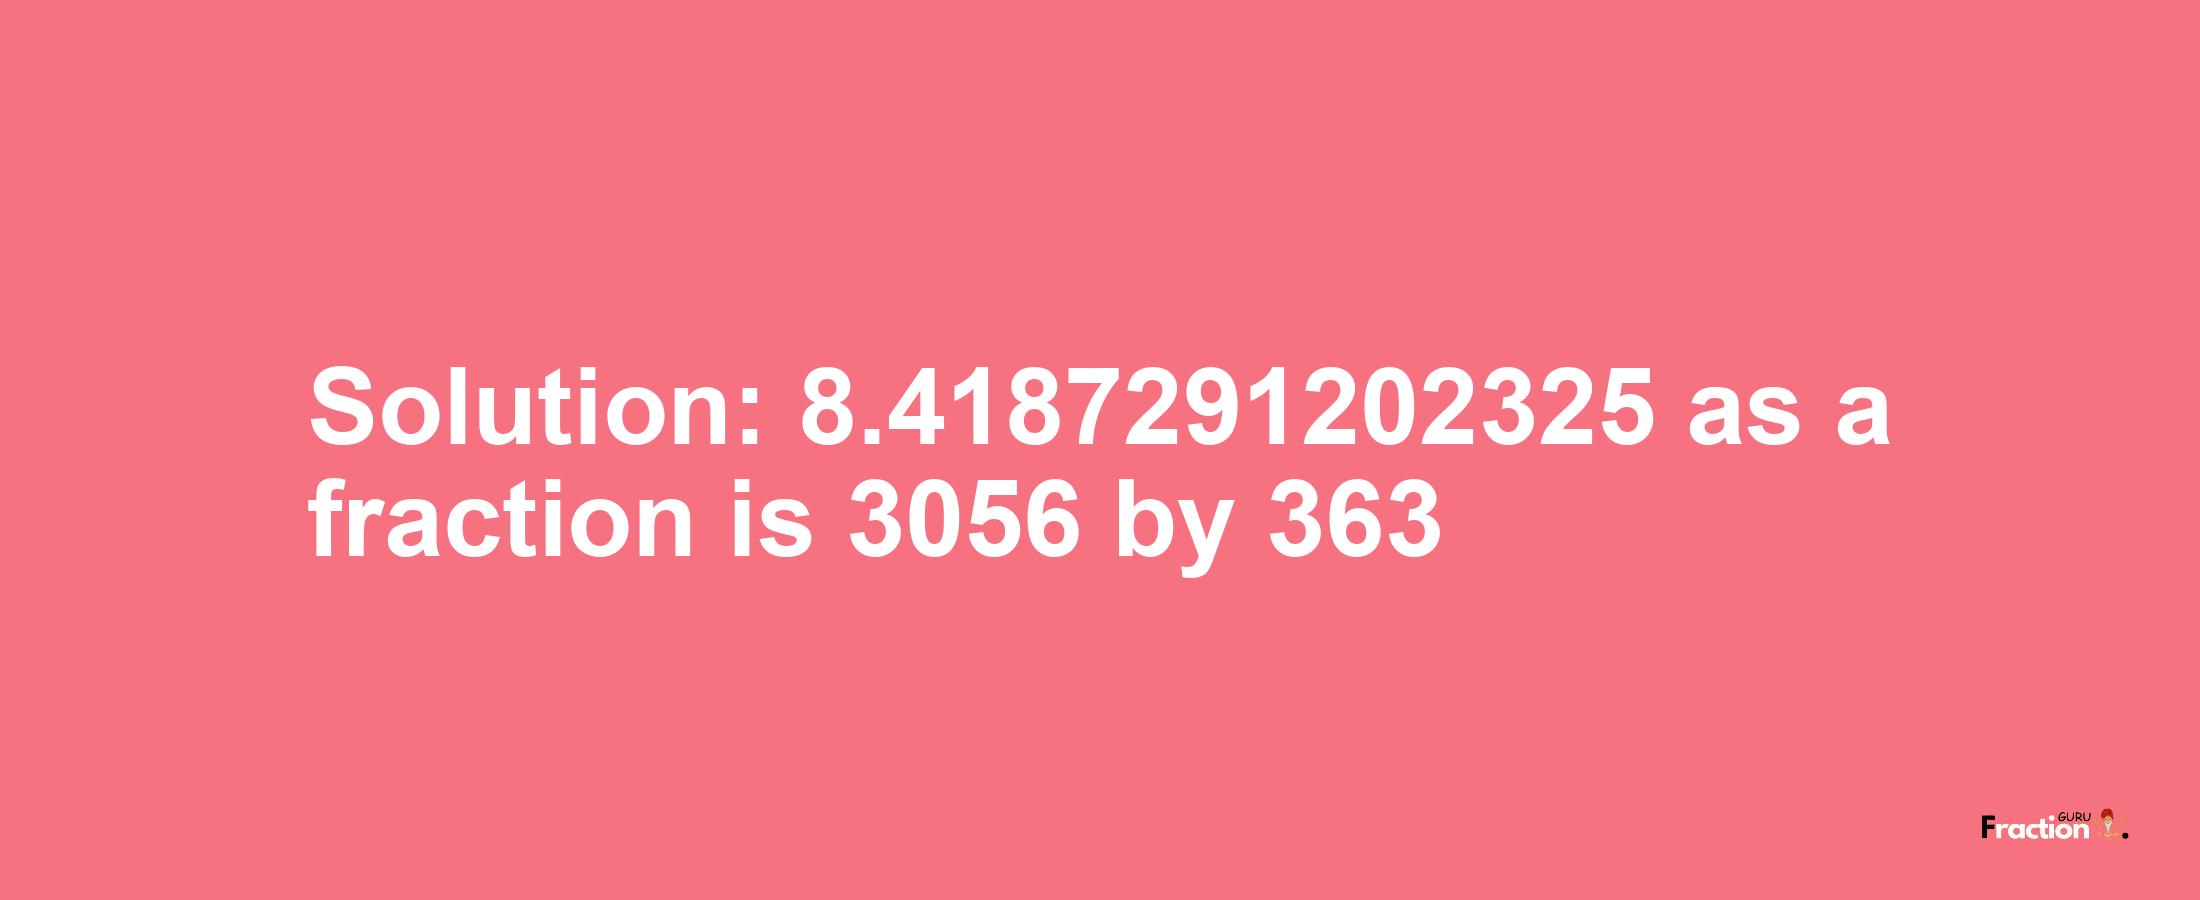 Solution:8.4187291202325 as a fraction is 3056/363